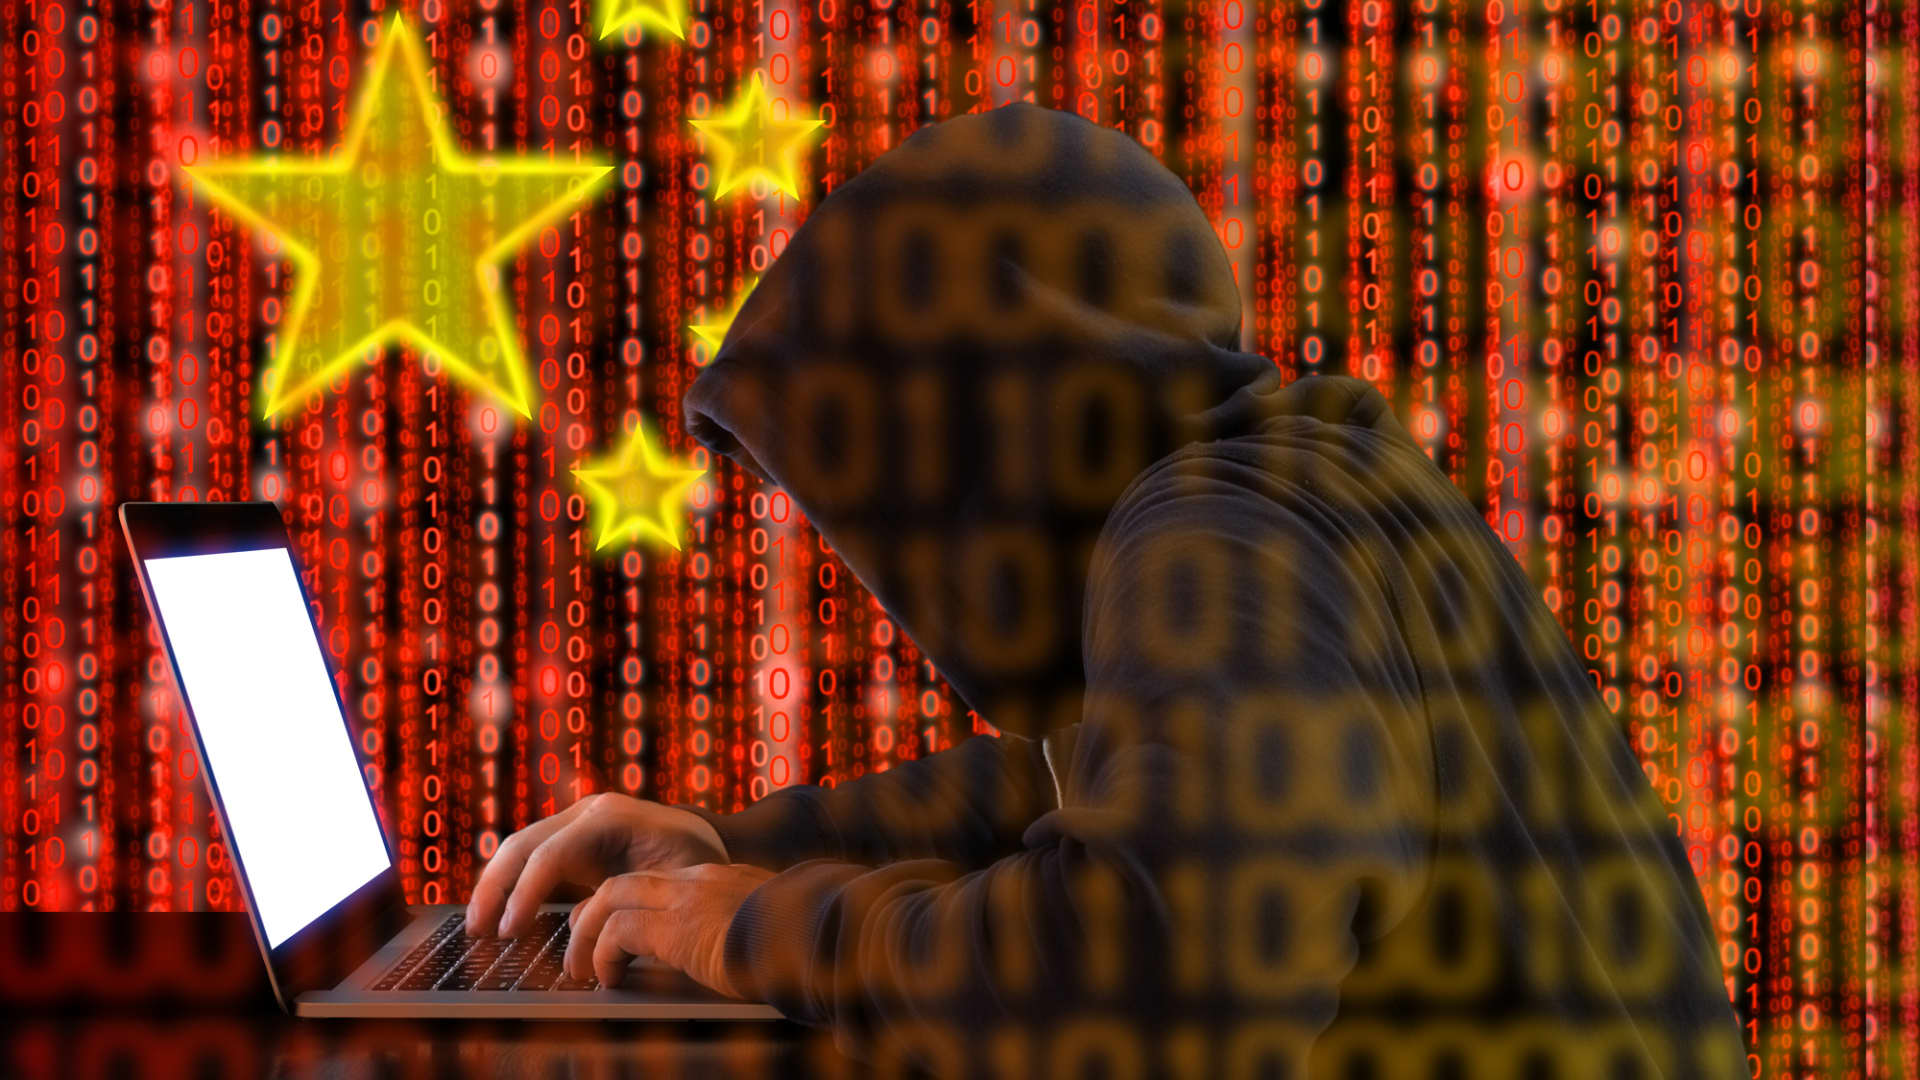 Britain accuses groups linked to China of 'malicious cyber campaigns' targeting voters and lawmakers